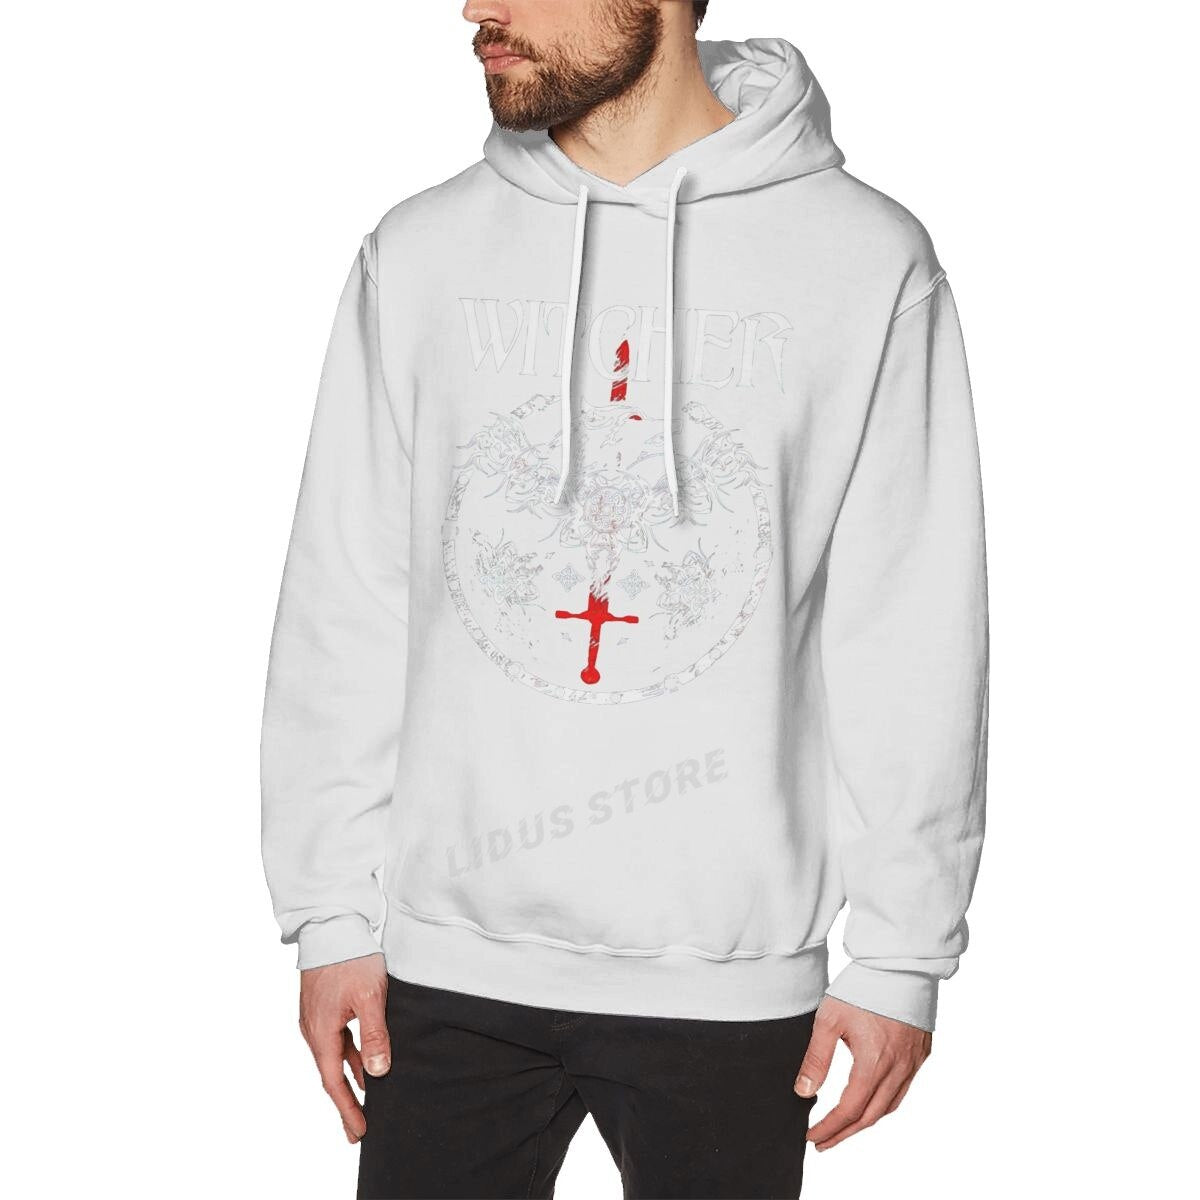 The Witcher Hoodie Collection (Colors Available)